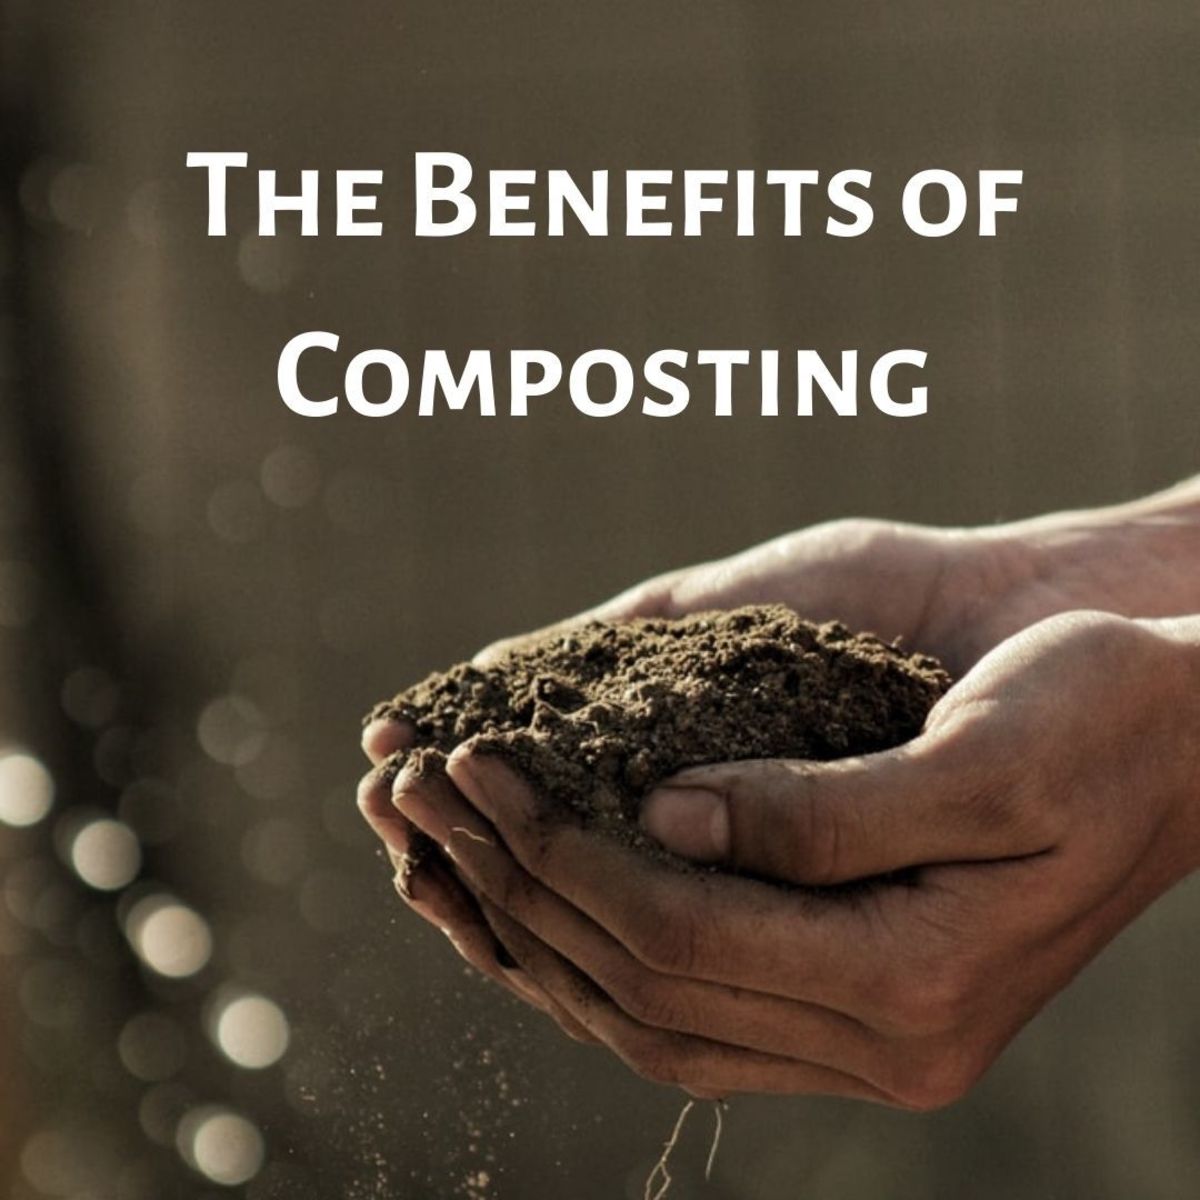 The Benefits of Composting (and How to Make It)